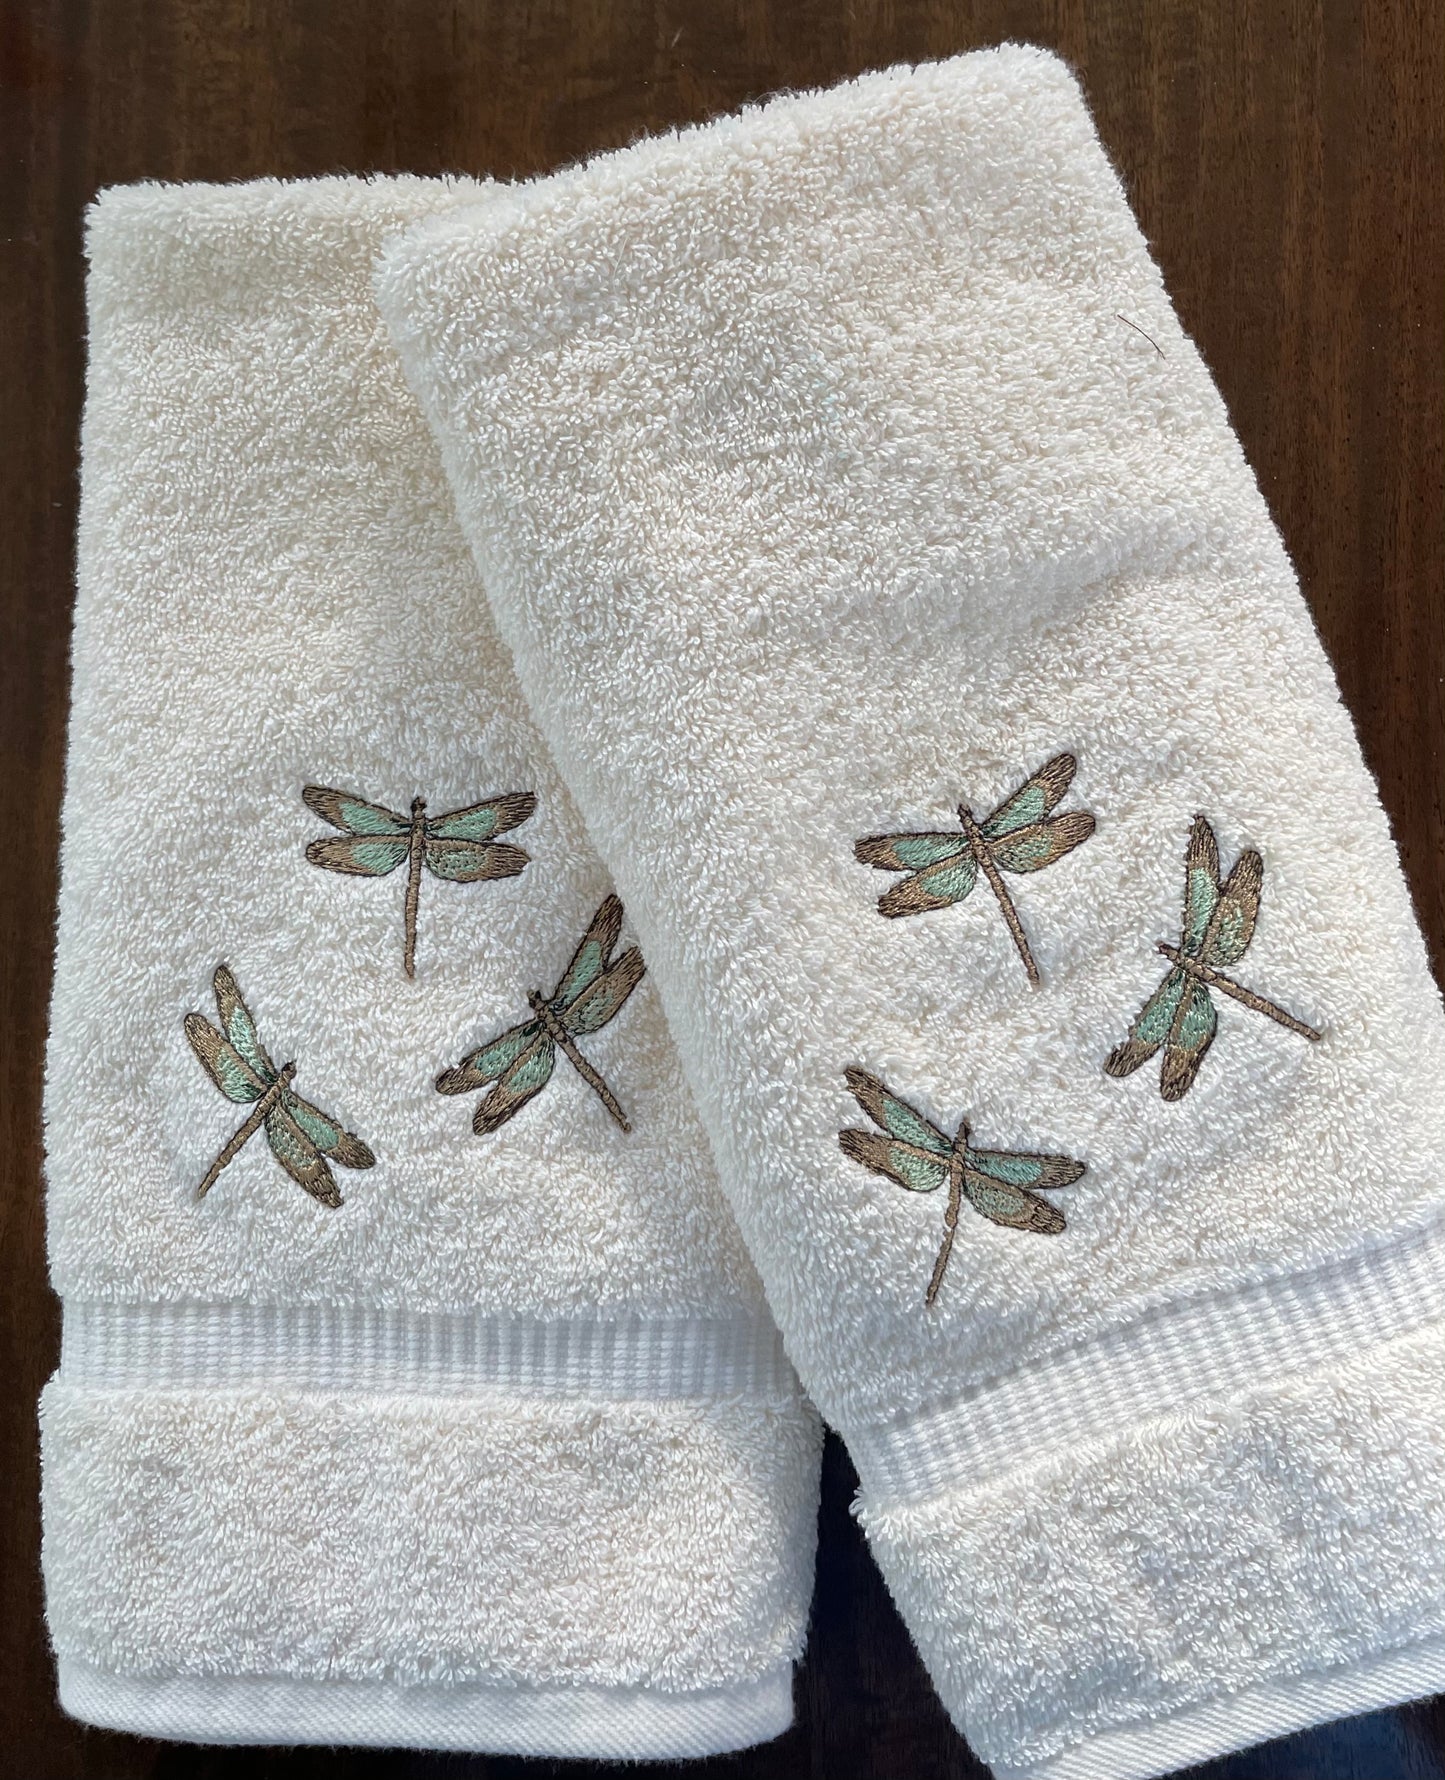 Dragonfly Embroidered Guest Bath Hand Towel. Trio of Dragonflies on Cotton Hand Towel